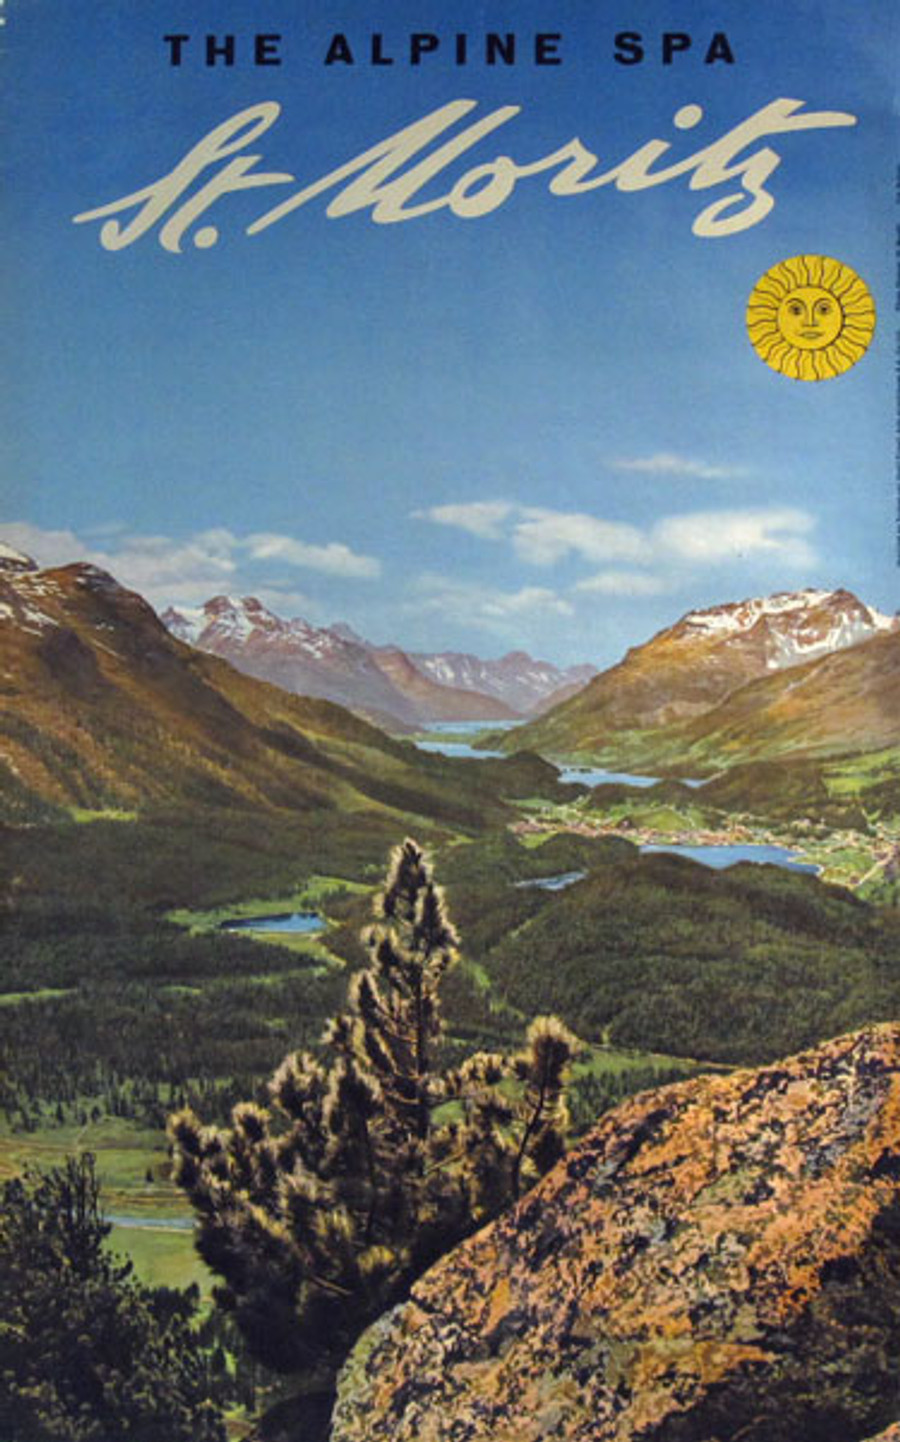 St. Moritz  the Alpine Spa original 1952 travel poster linen asked depicts village in Swill Alps